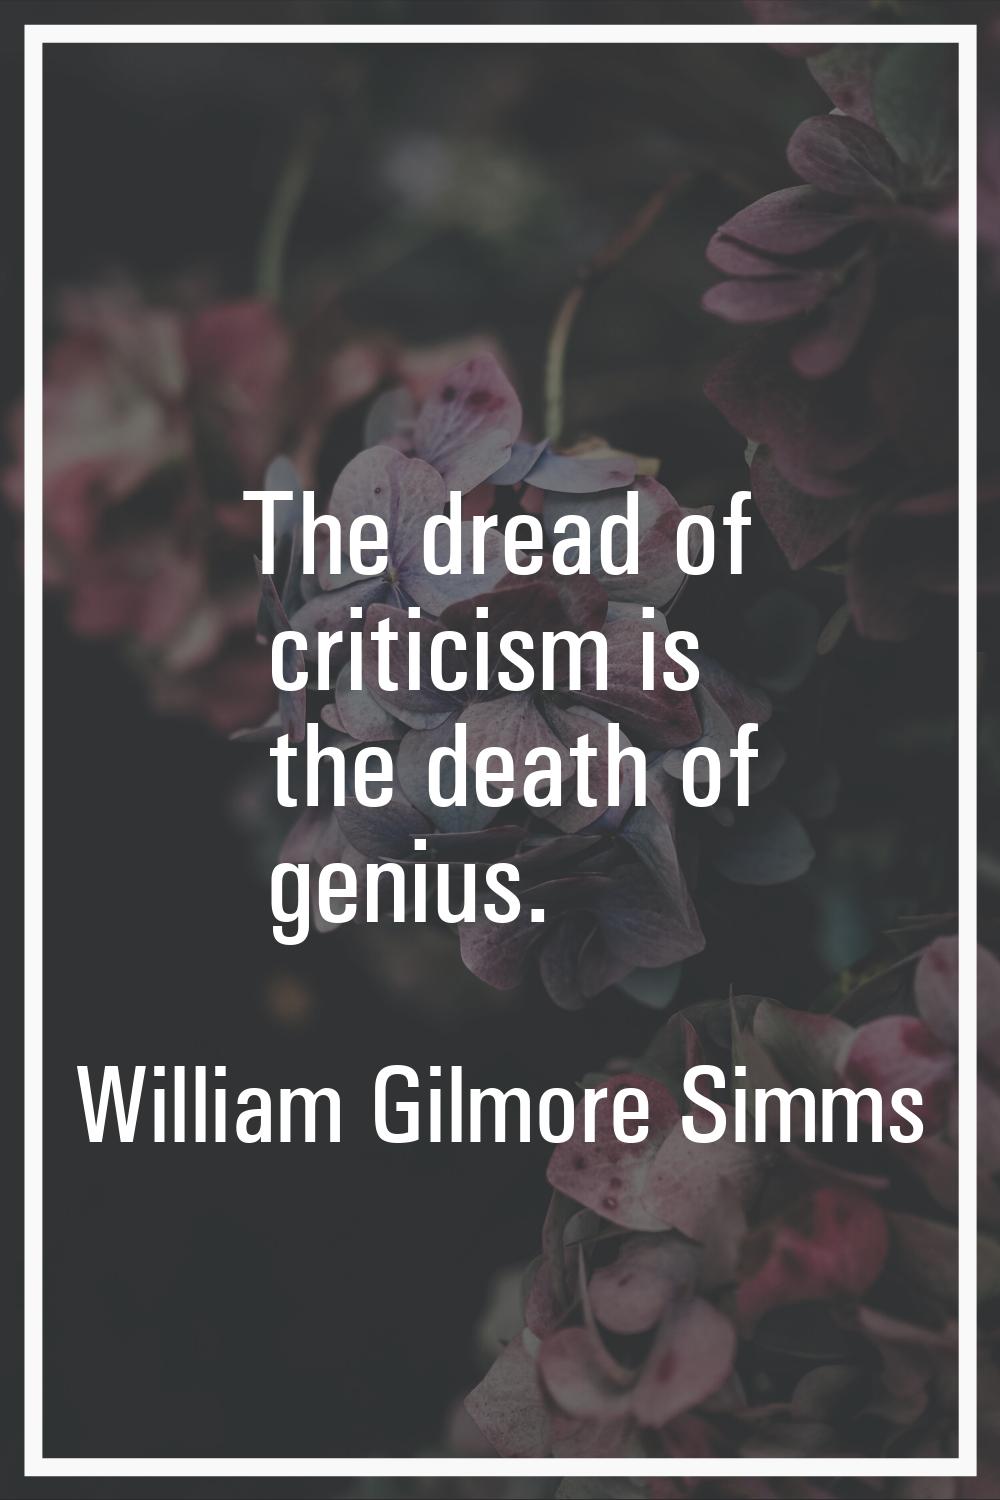 The dread of criticism is the death of genius.